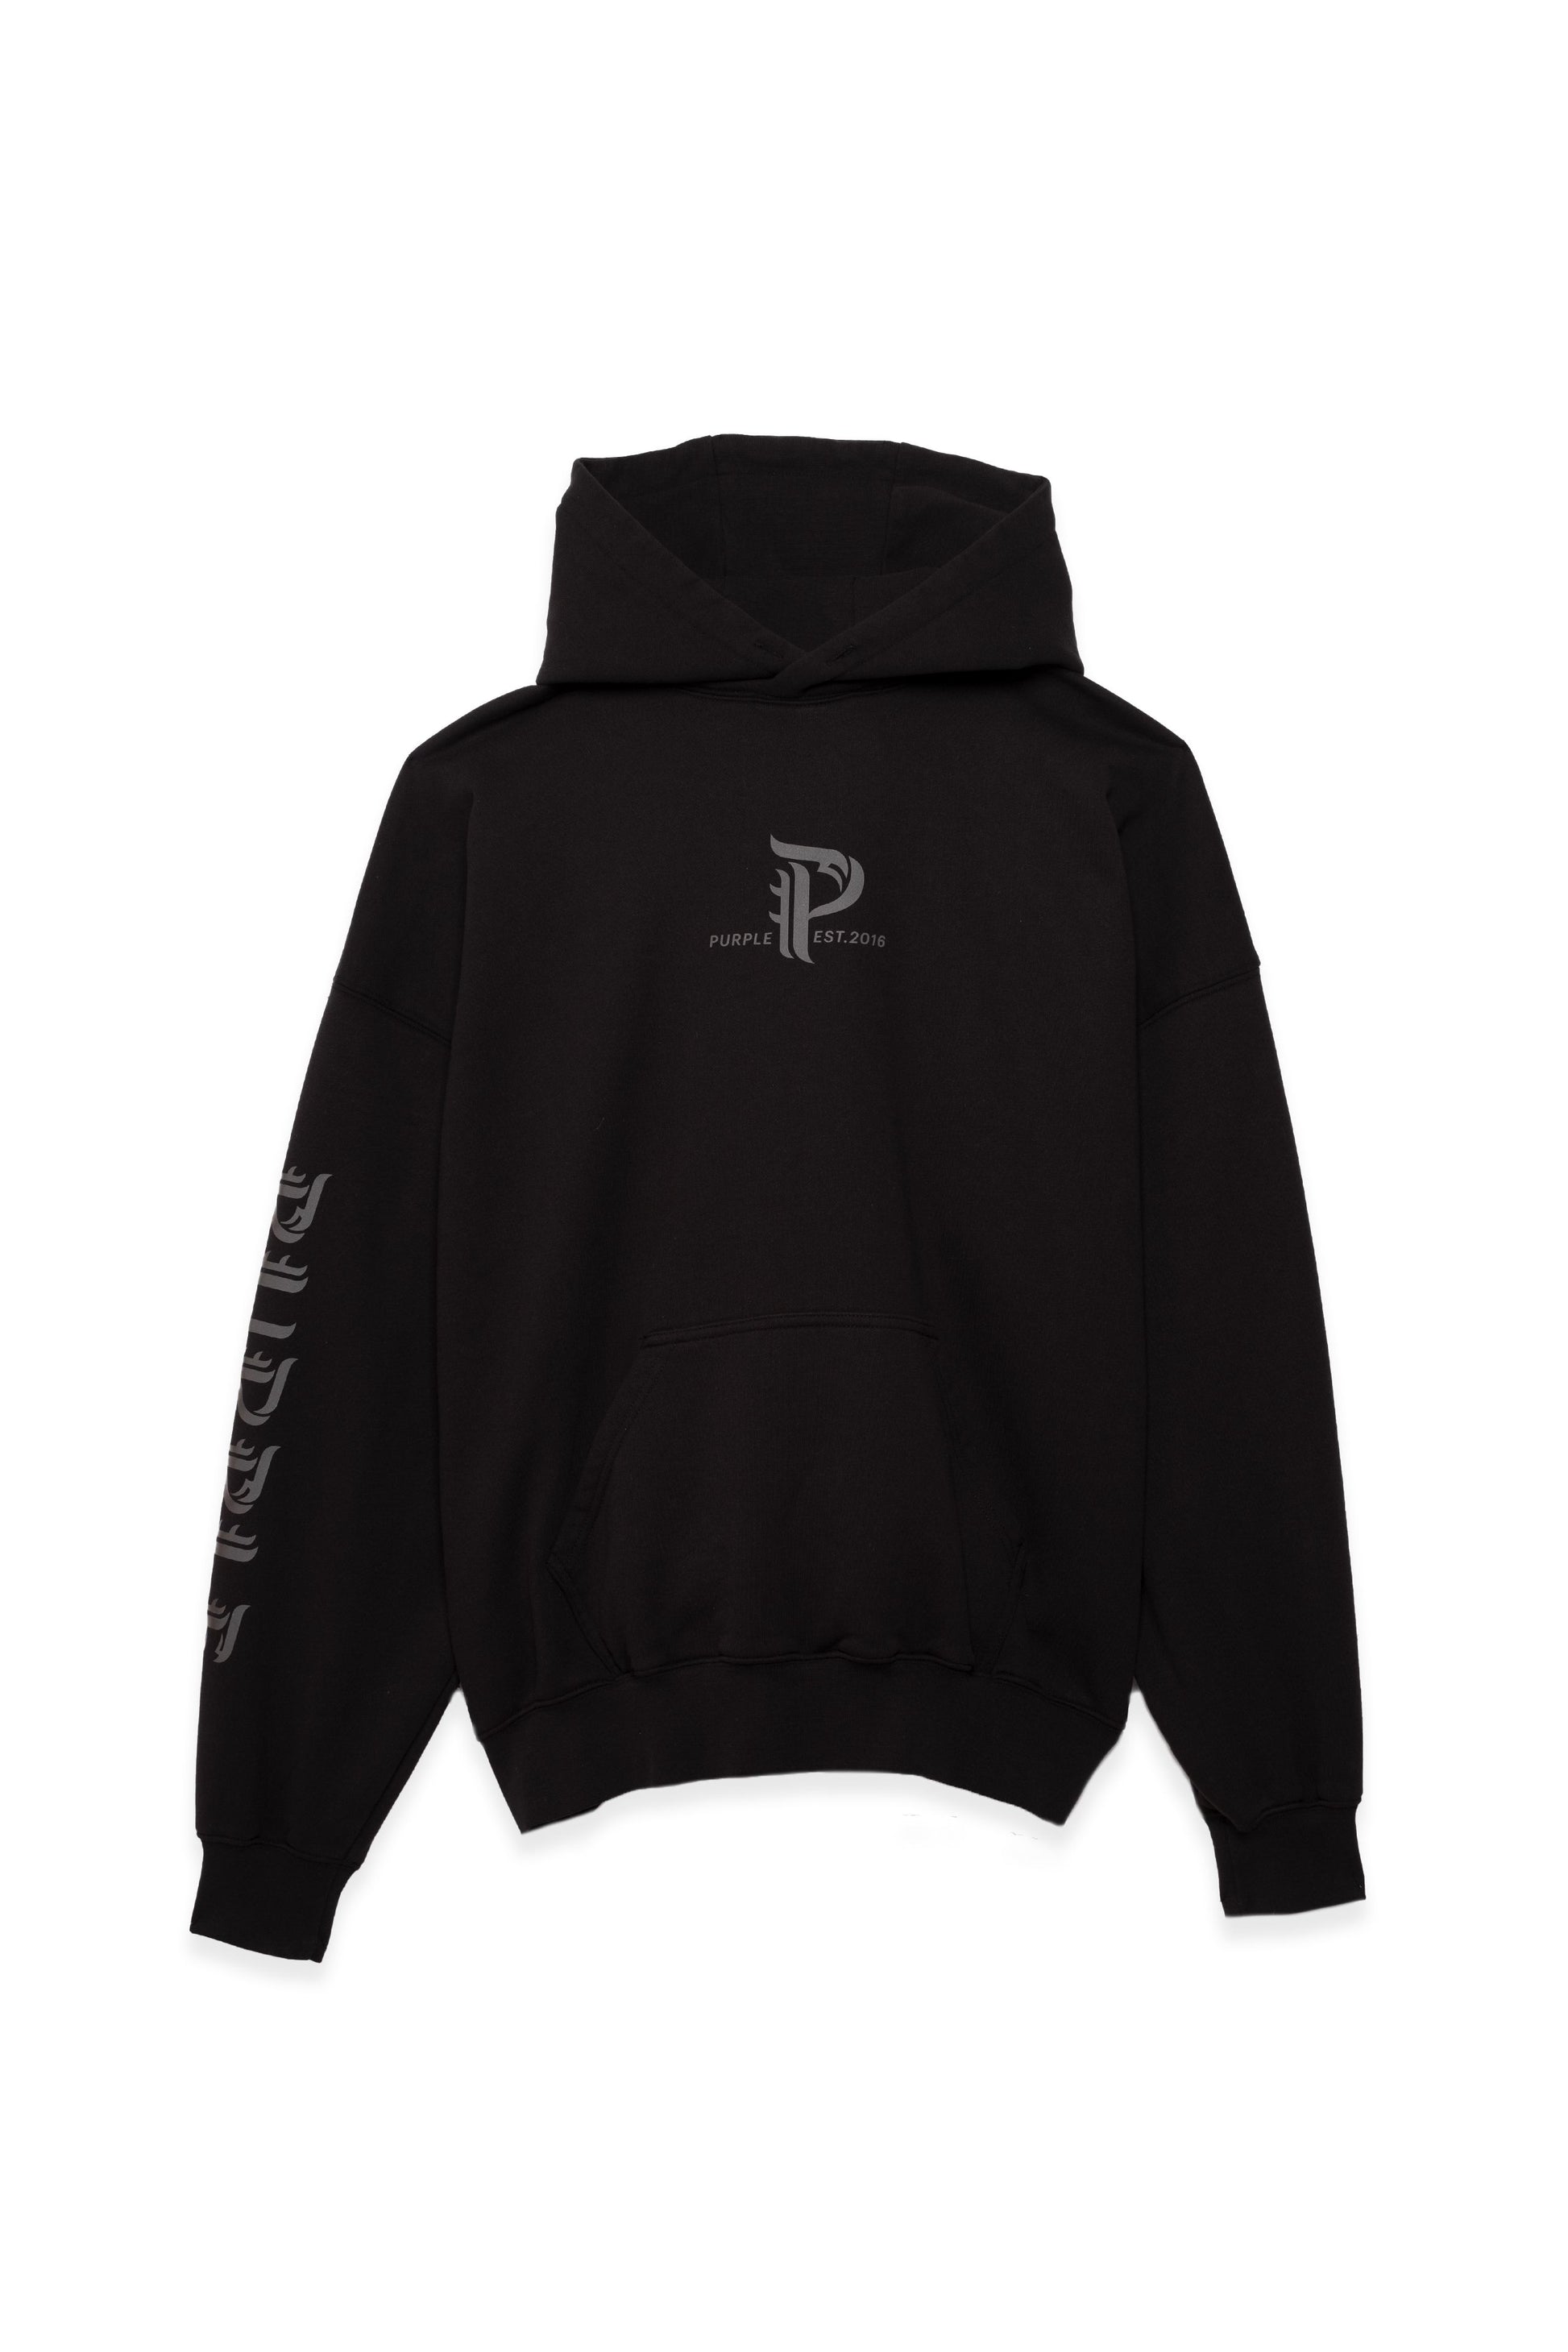 PURPLE BRAND - Relaxed Fit Oversized Hoodie Sweatshirt - Style No. P401 - Wings - Front